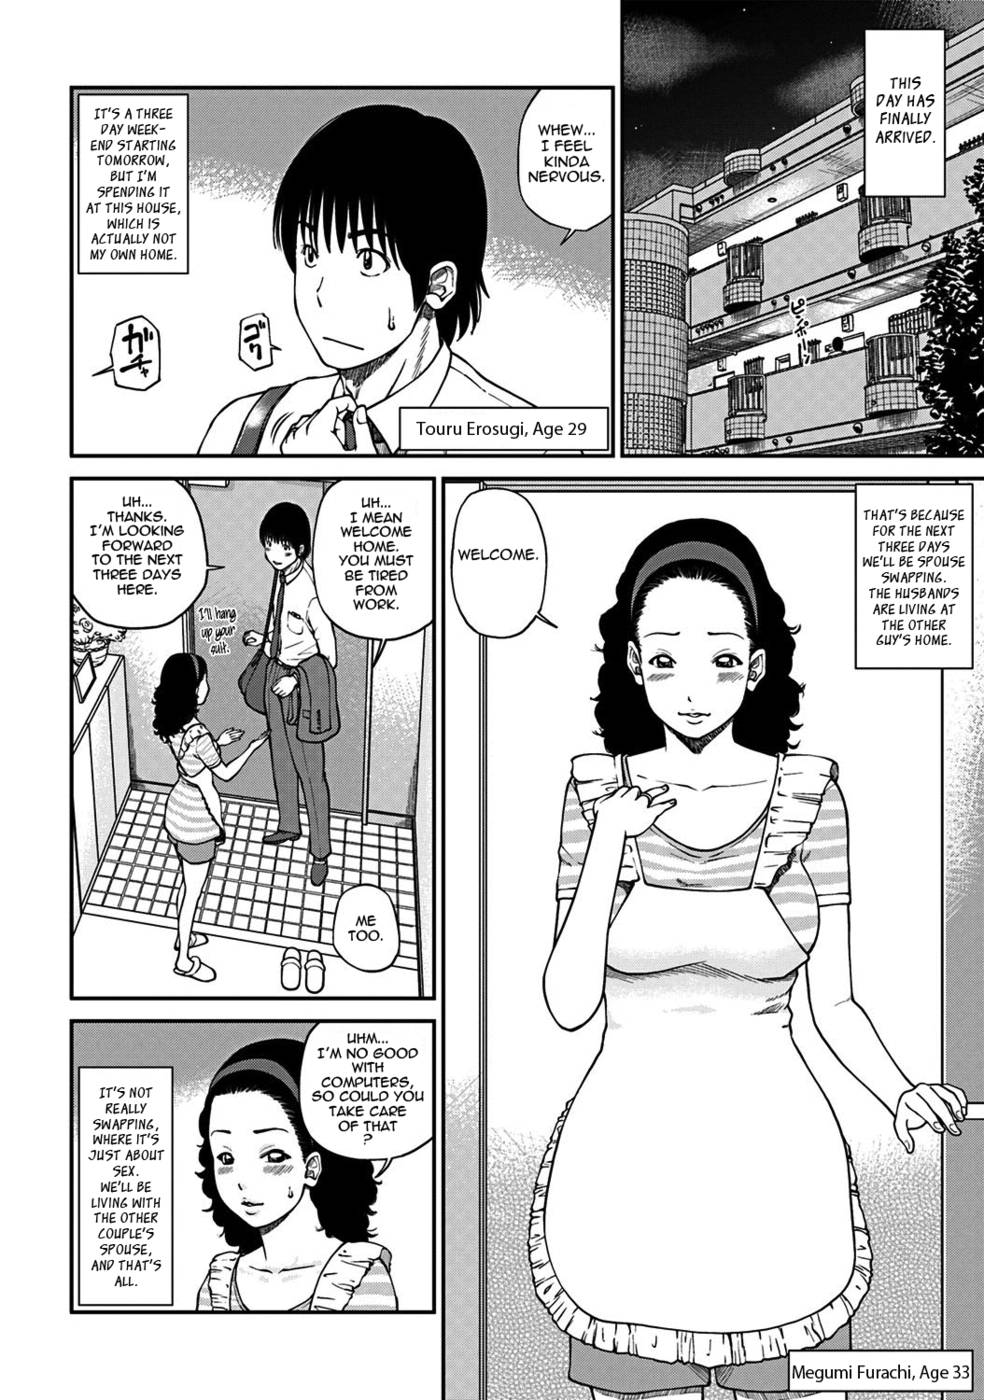 33 Year Old Unsatisfied Wife-Chapter 2-Spouse Swapping-First Night-Hentai Manga Hentai Comic photo